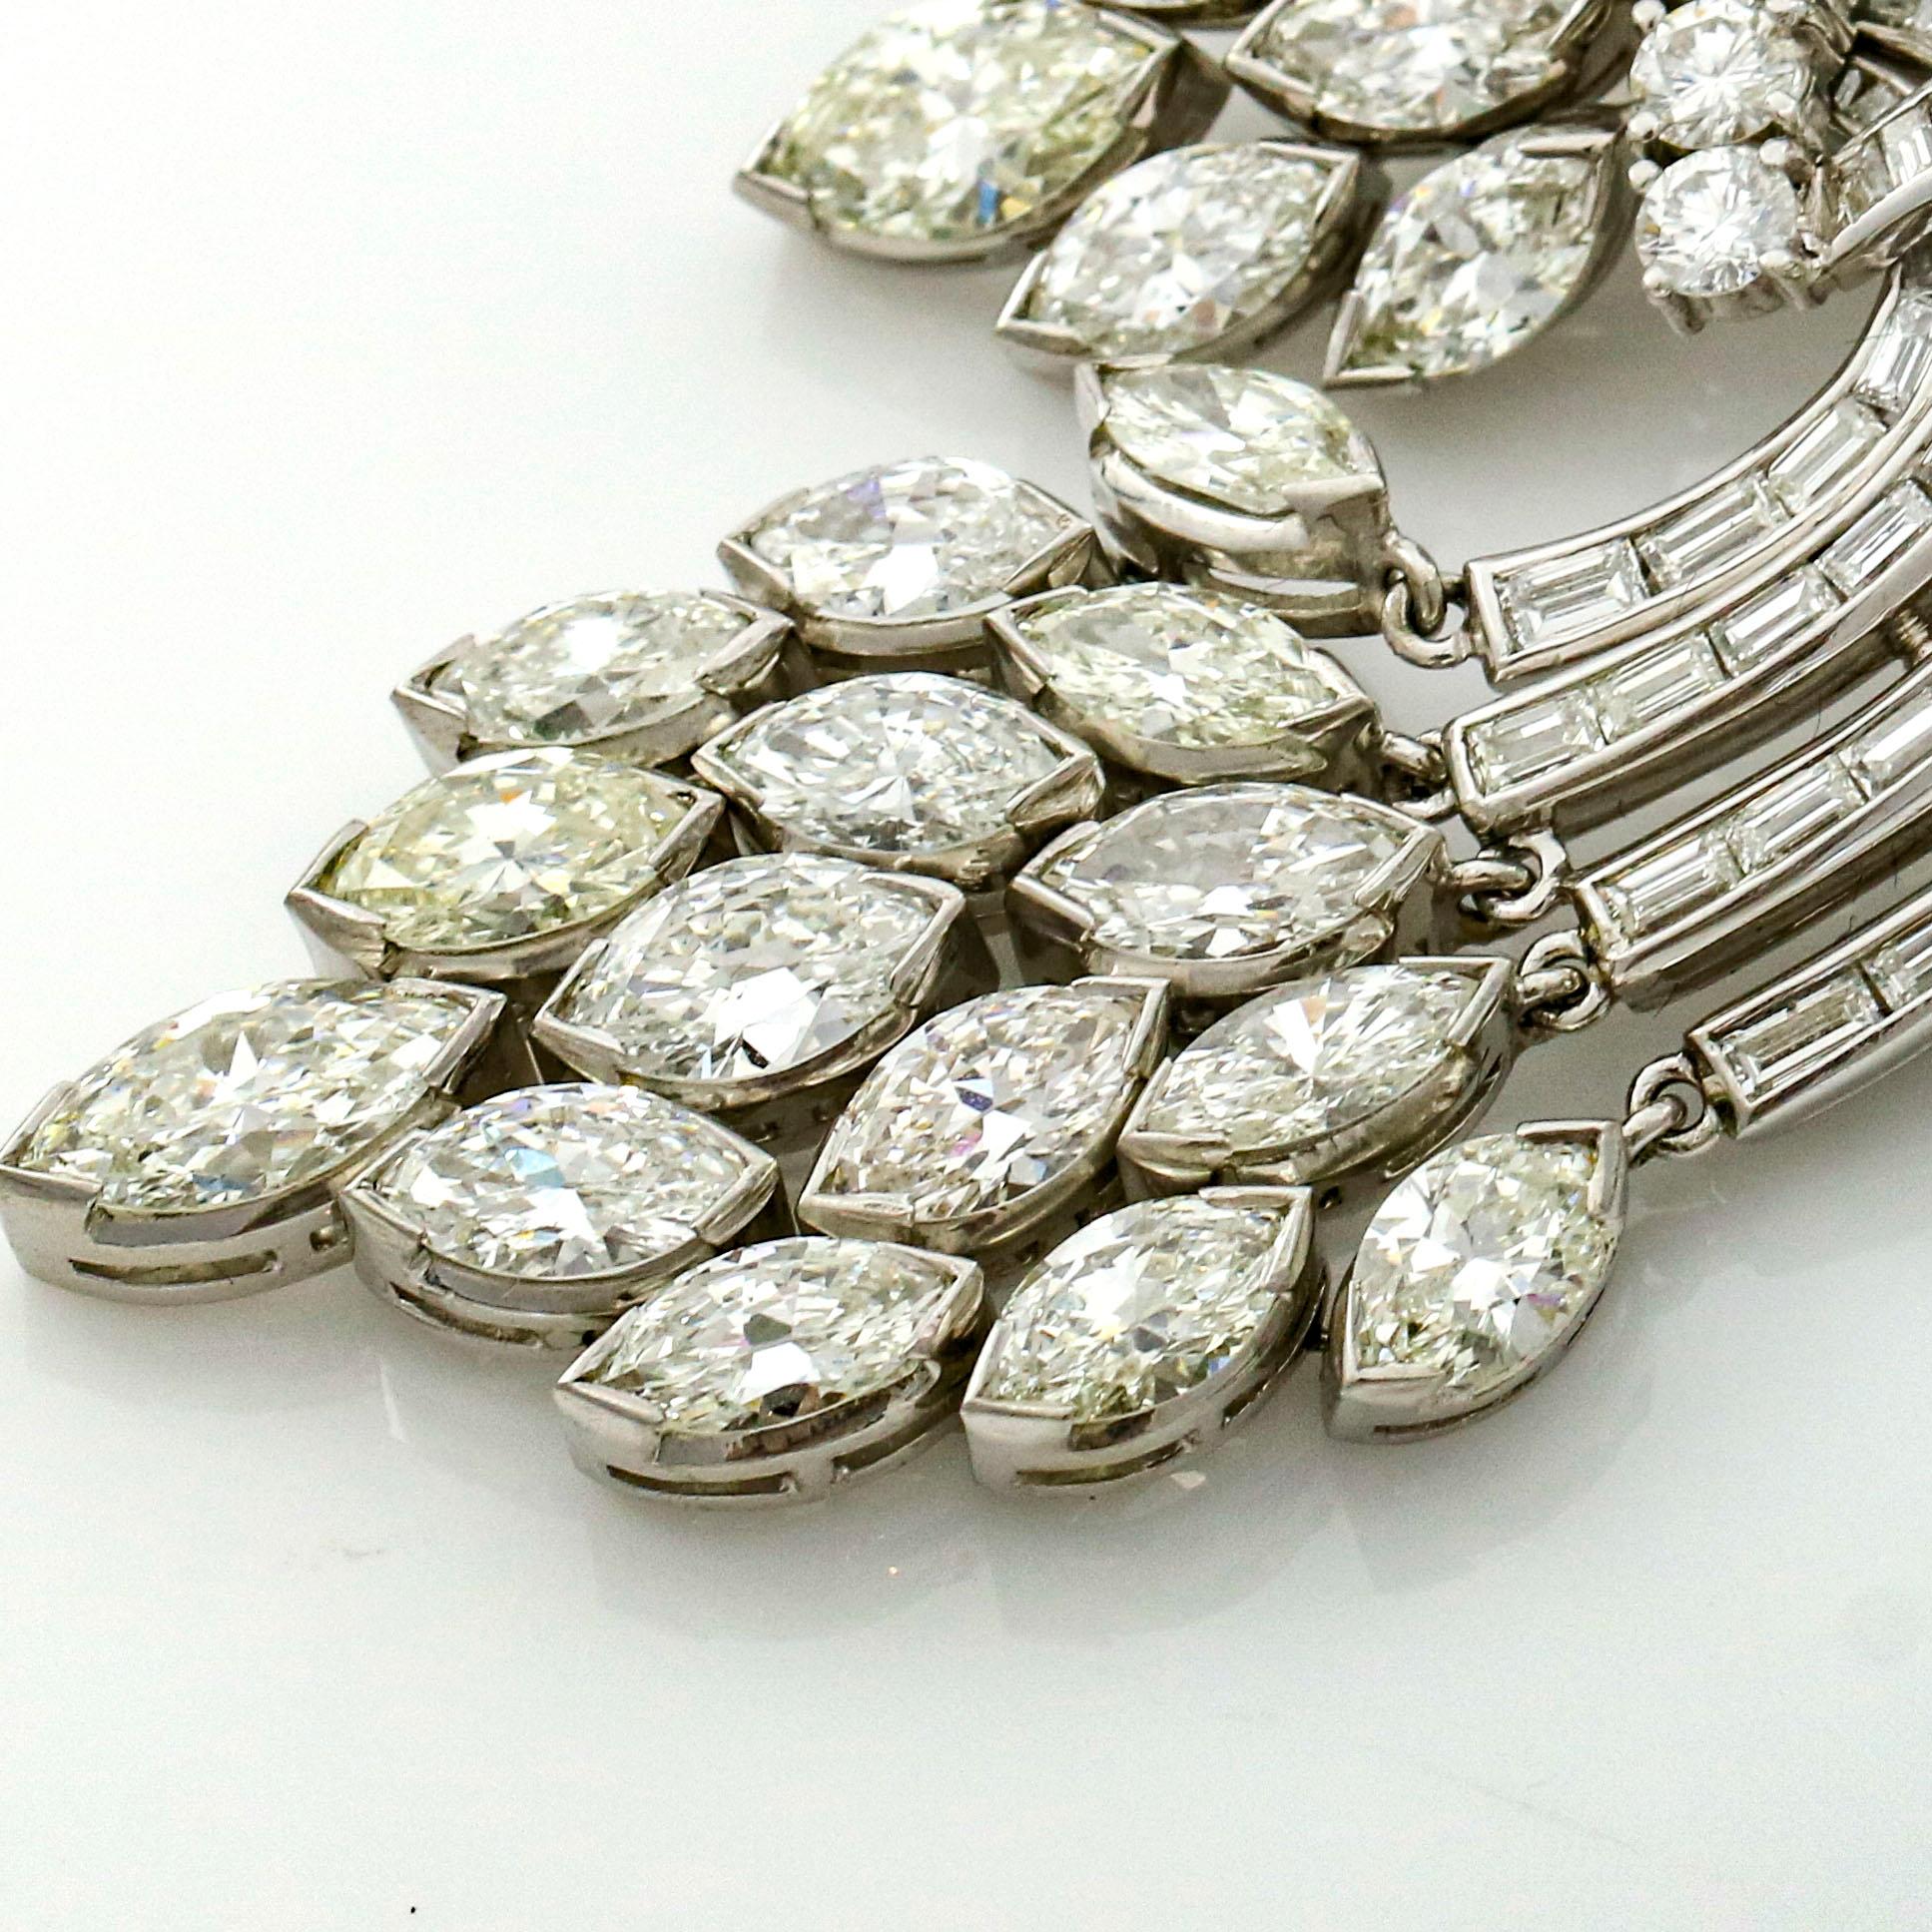 19.24 Carat Platinum Diamond Aria 1950s Brooch In Excellent Condition For Sale In Fort Lauderdale, FL